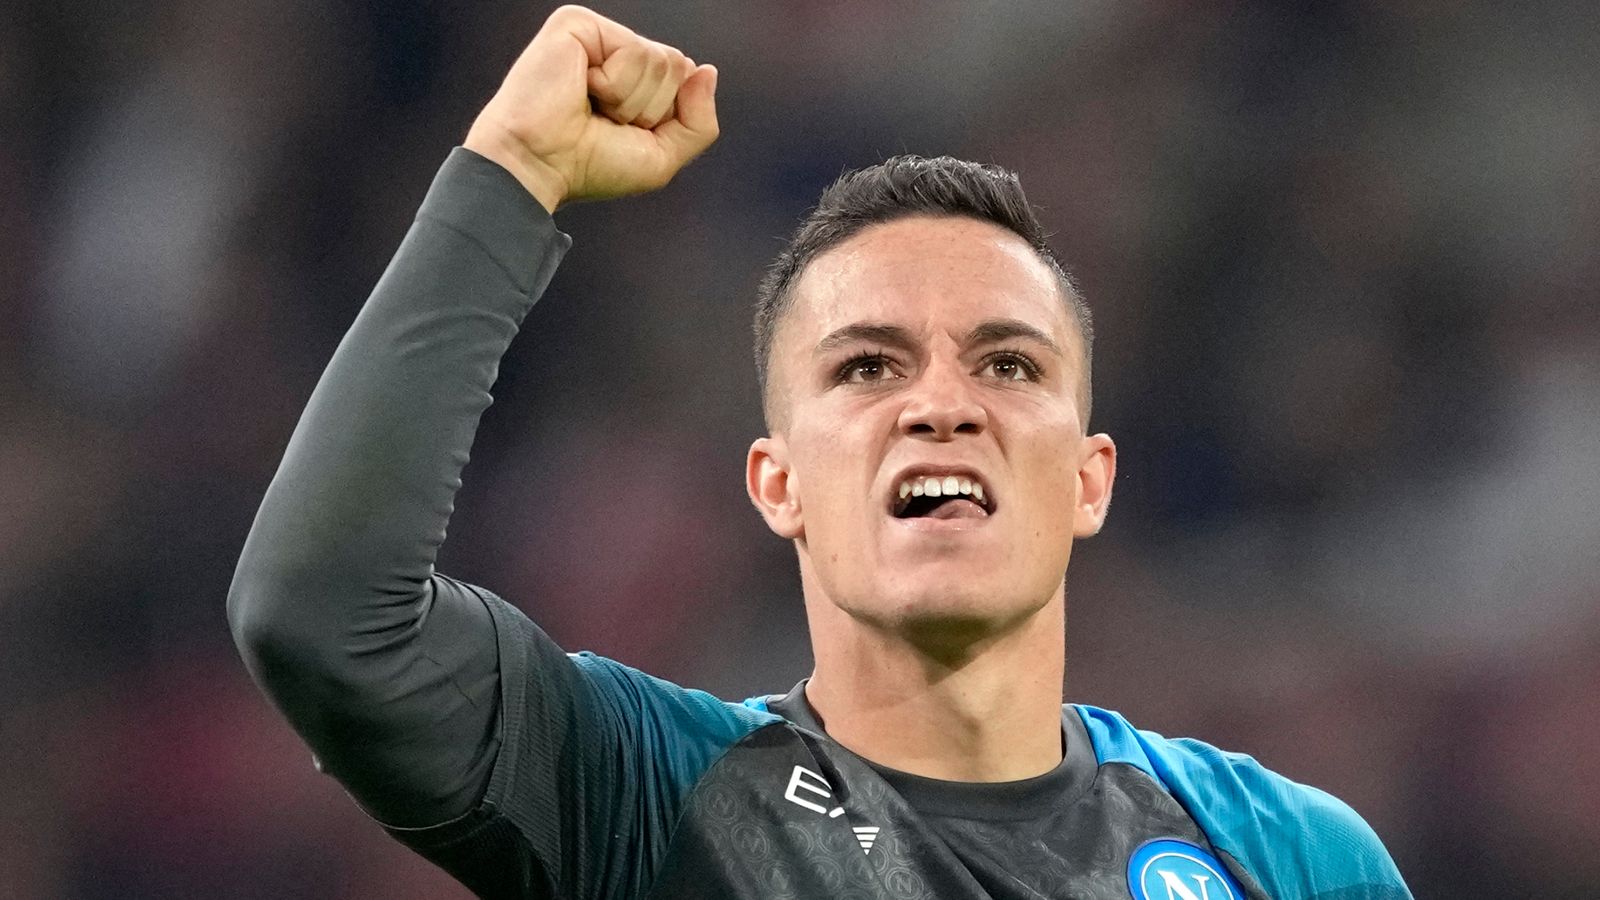 Napoli thrash Ajax with Barcelona and Atletico Madrid suffering defeats – Champions League round-up